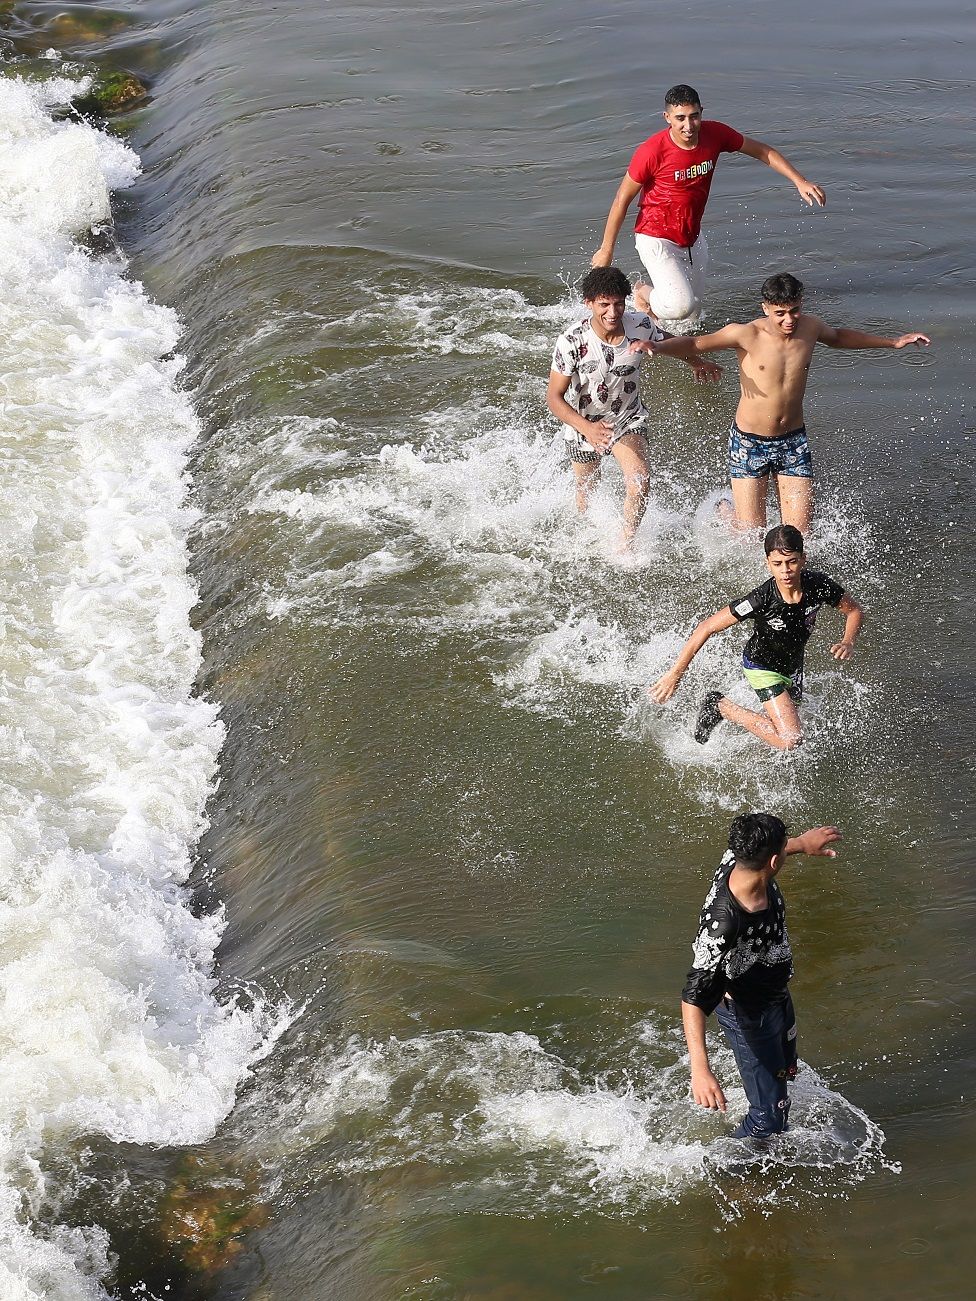 People swim in the Nile river during hot weather in the Qanater neighbourhood on the outskirts of Cairo, Egypt.